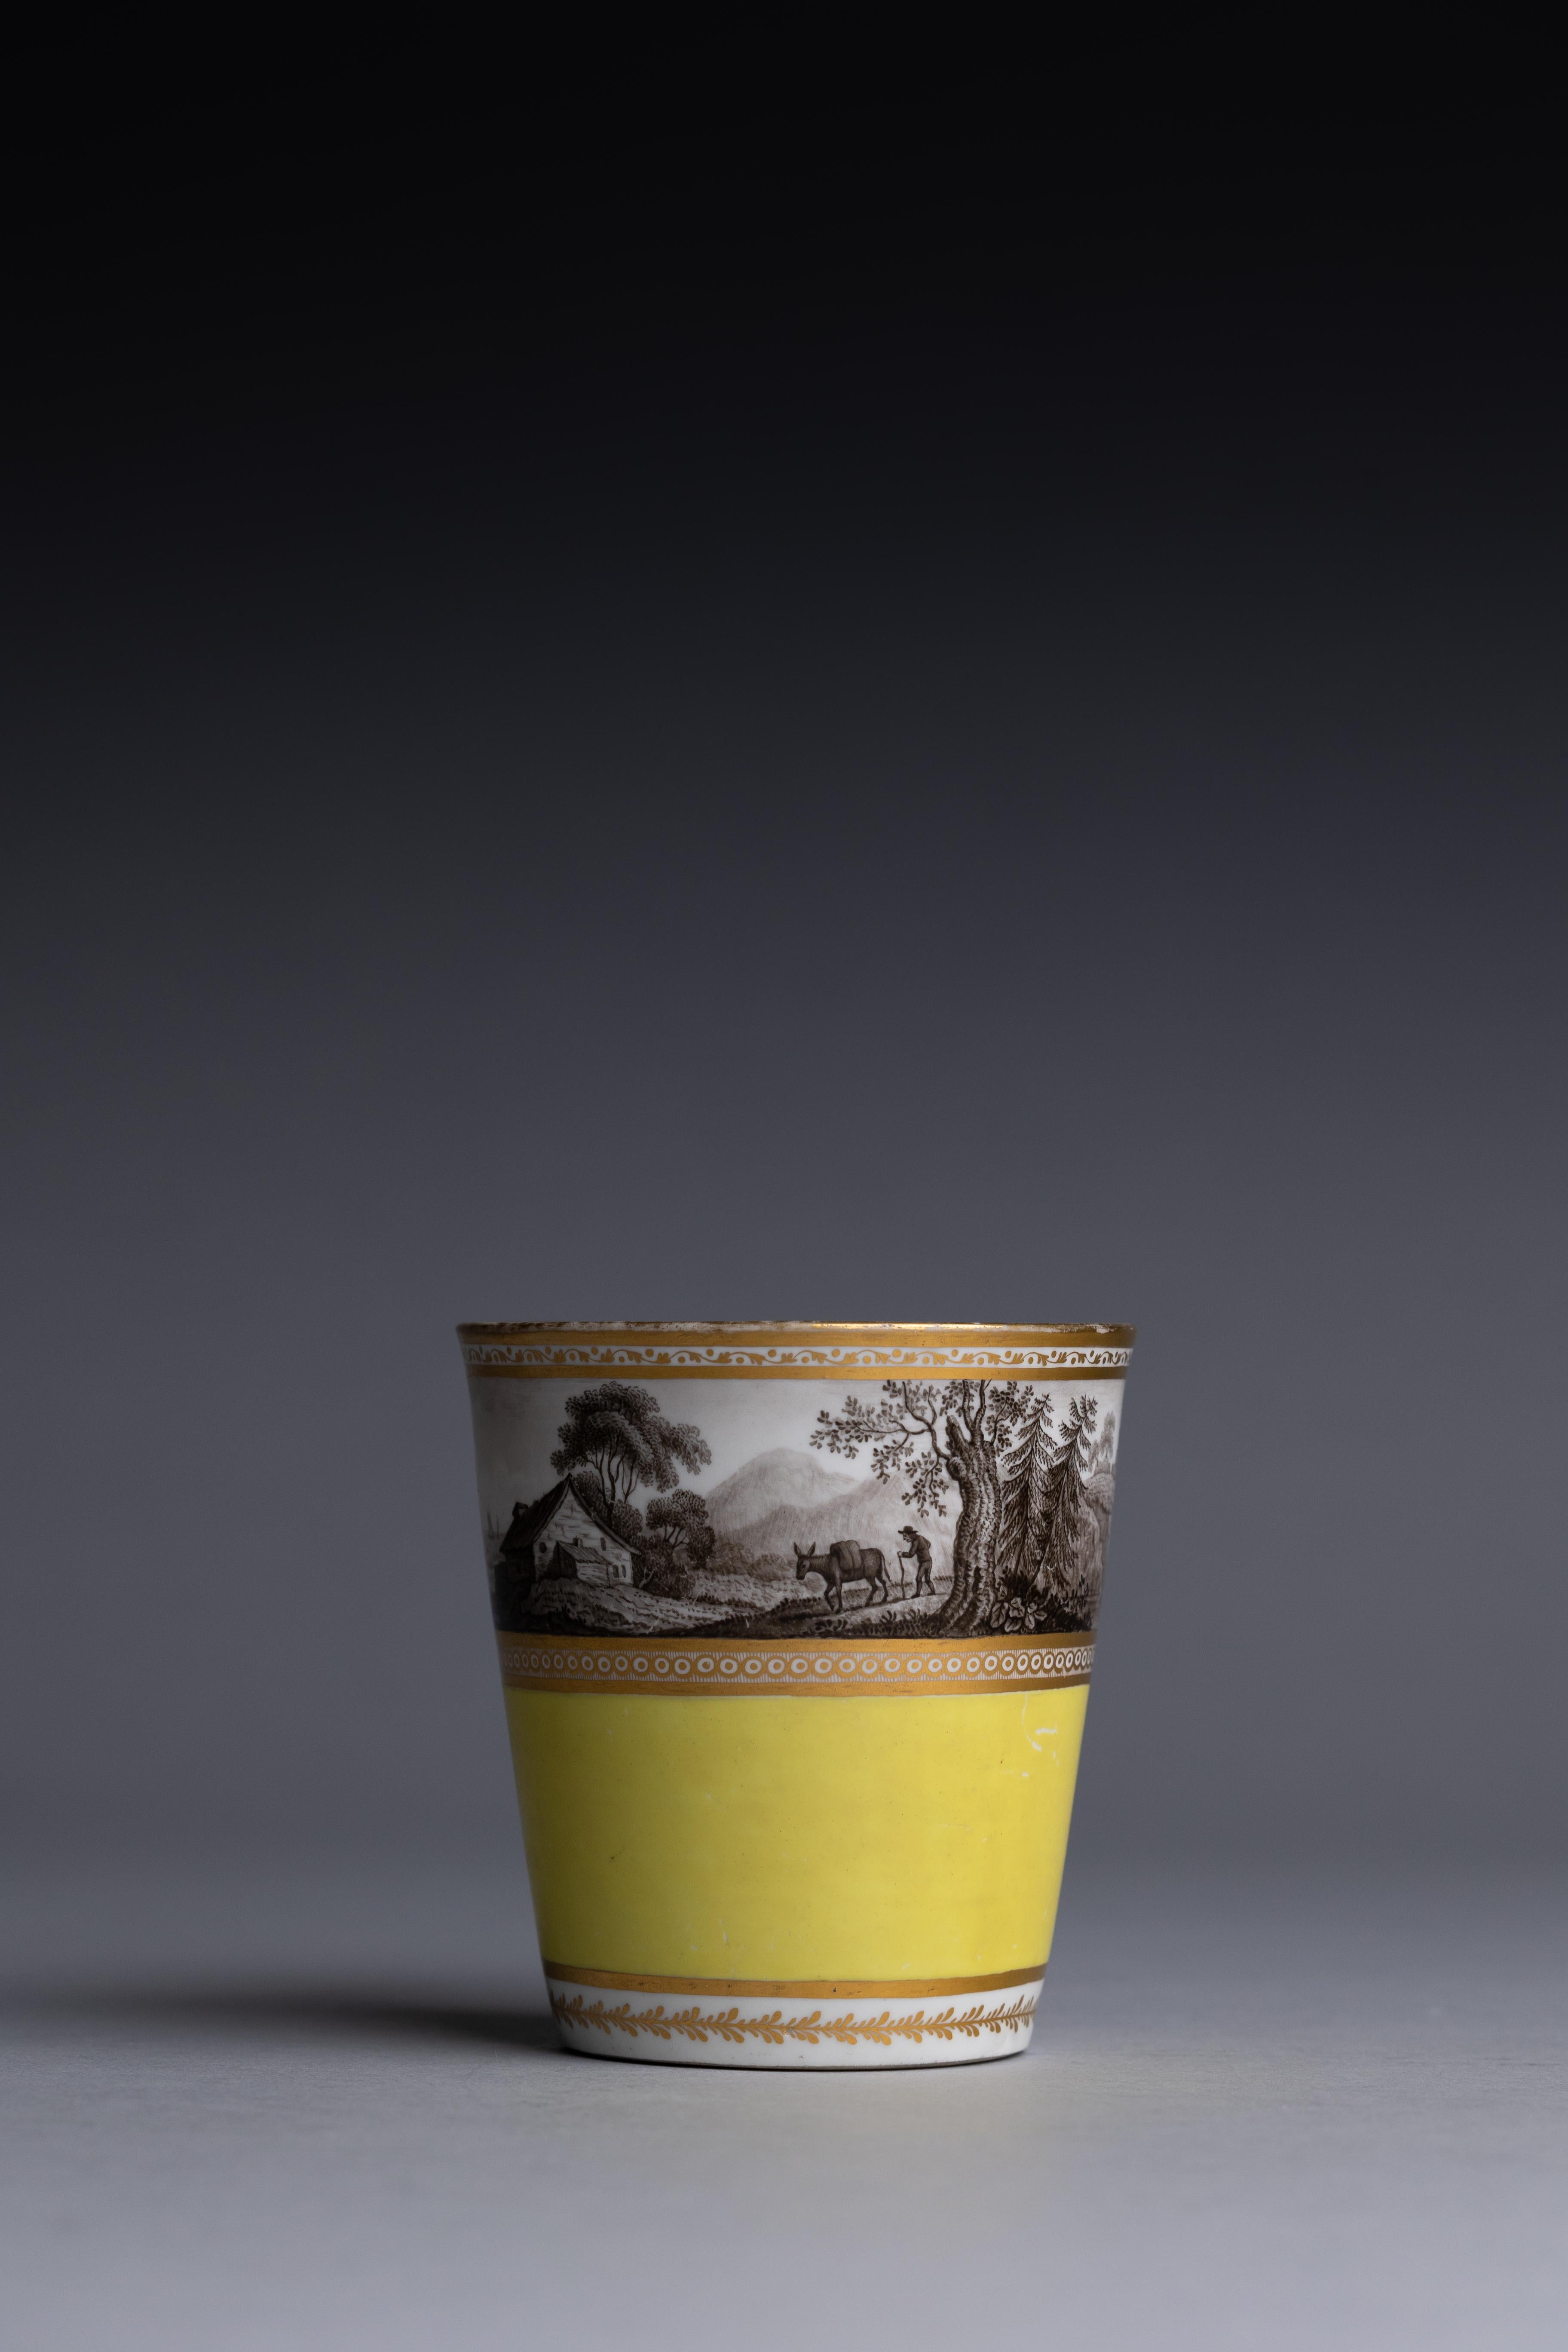 An early Worcester Flight & Barr bright yellow beaker with gilding and a finely painted sepia scene of a landscape. The scene, possibly painted by John Pennington, shows two figures looking at a ship sailing out to sea before a cliffside fort, a